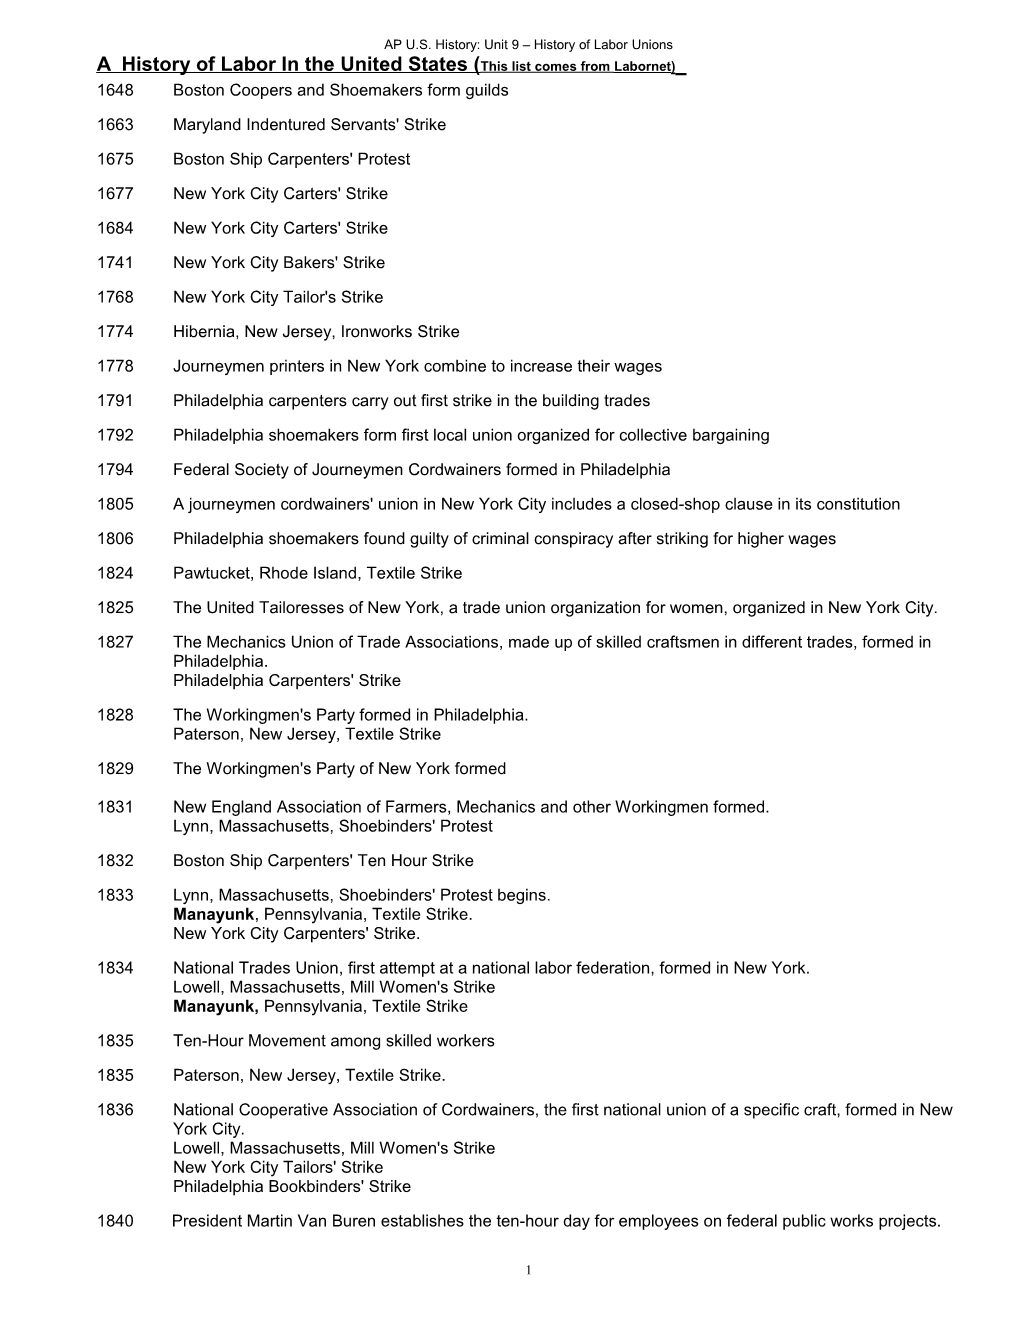 A History of Labor in the United States (This List Comes from Labornet)